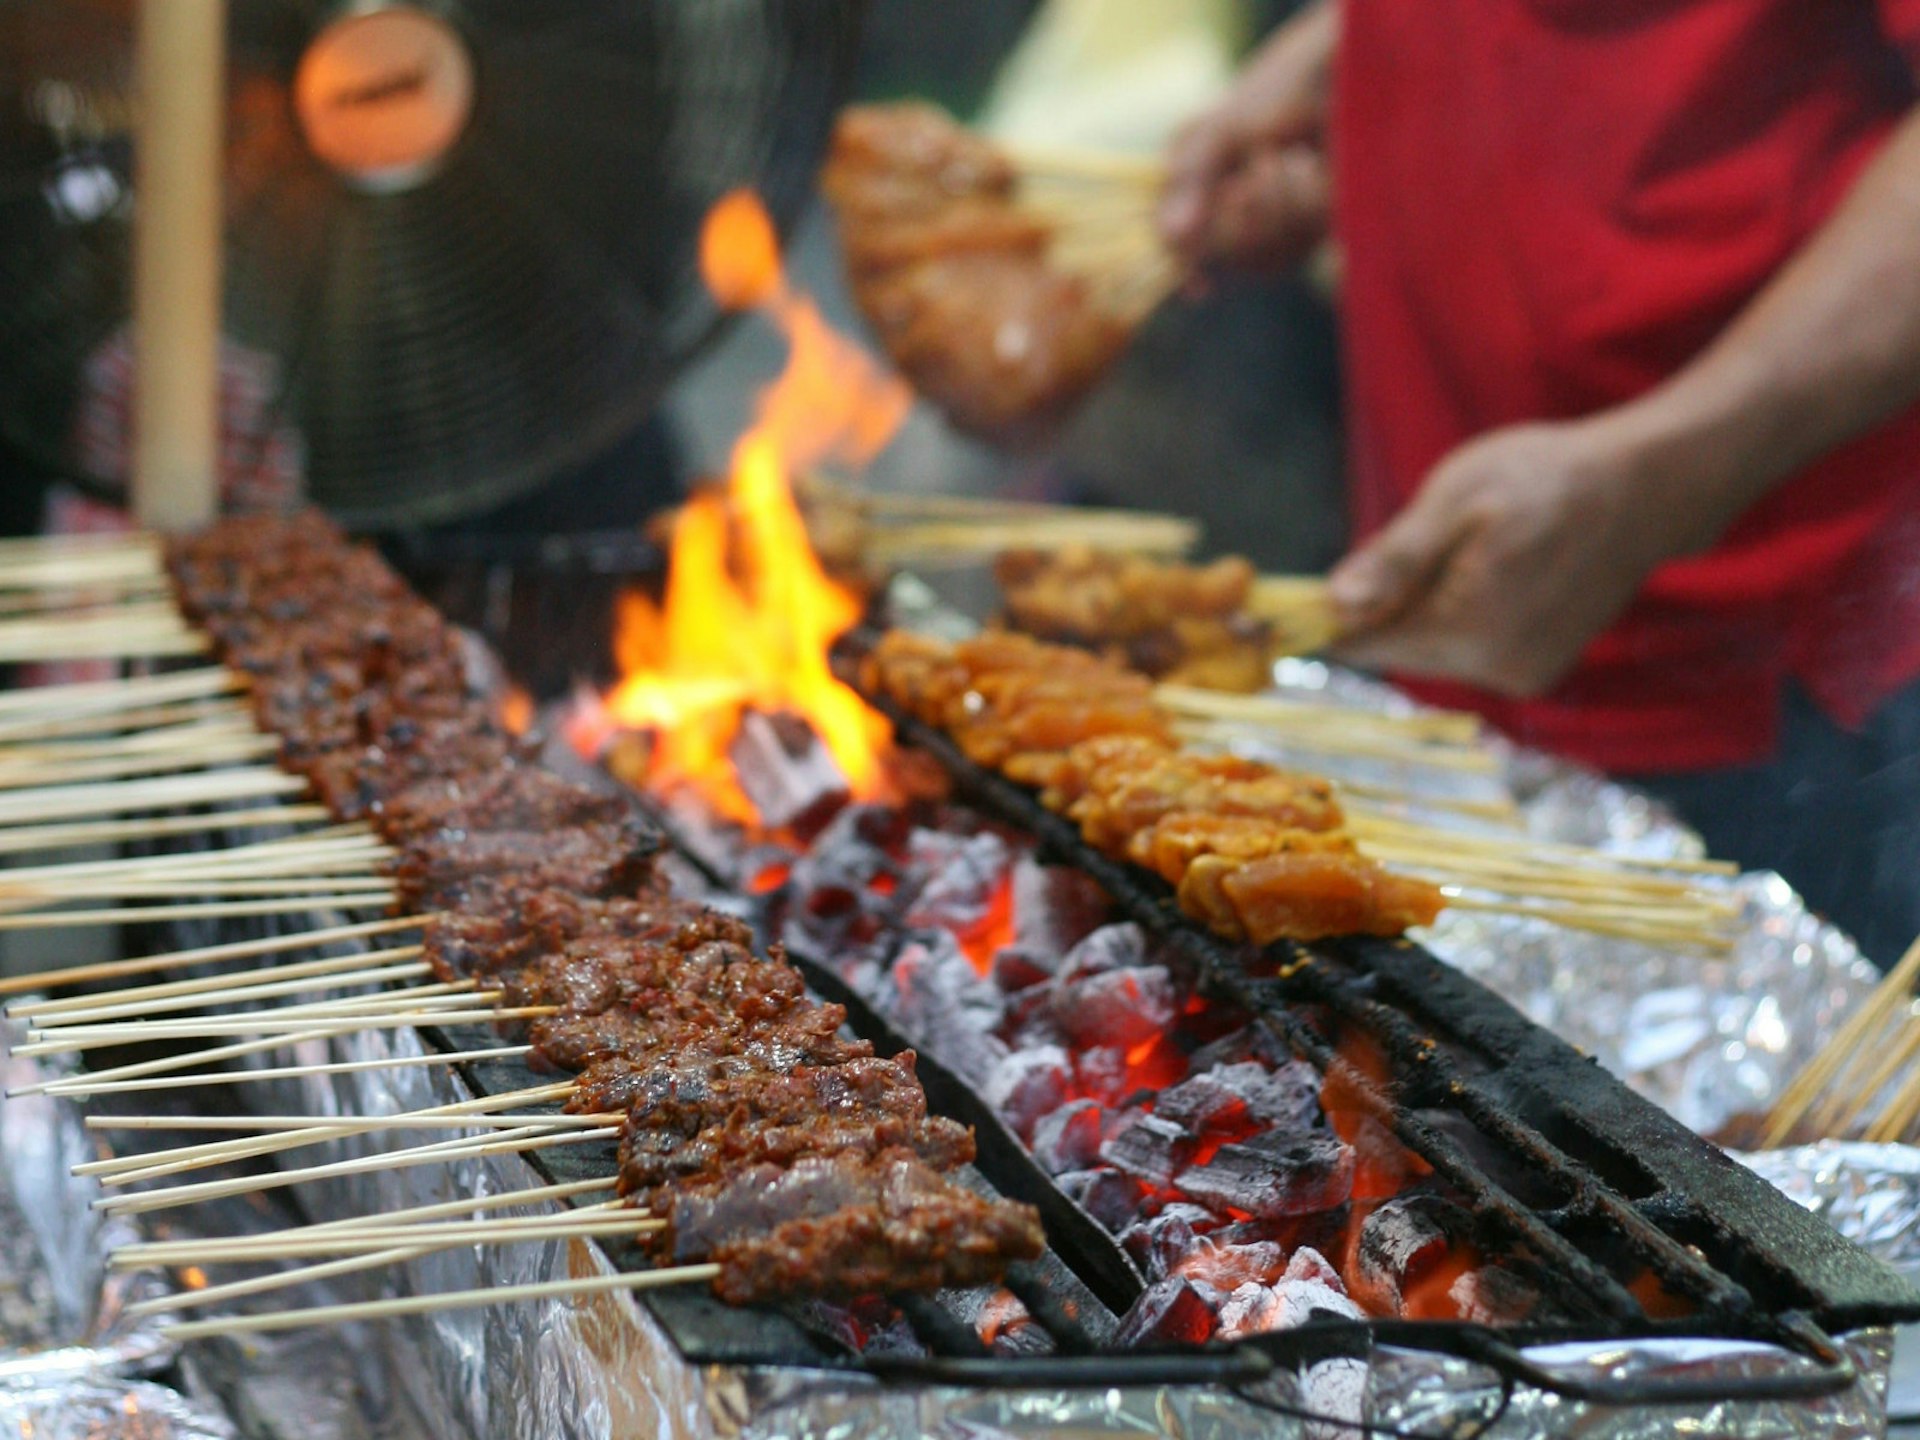 Satay chicken at a street food market in Singapore